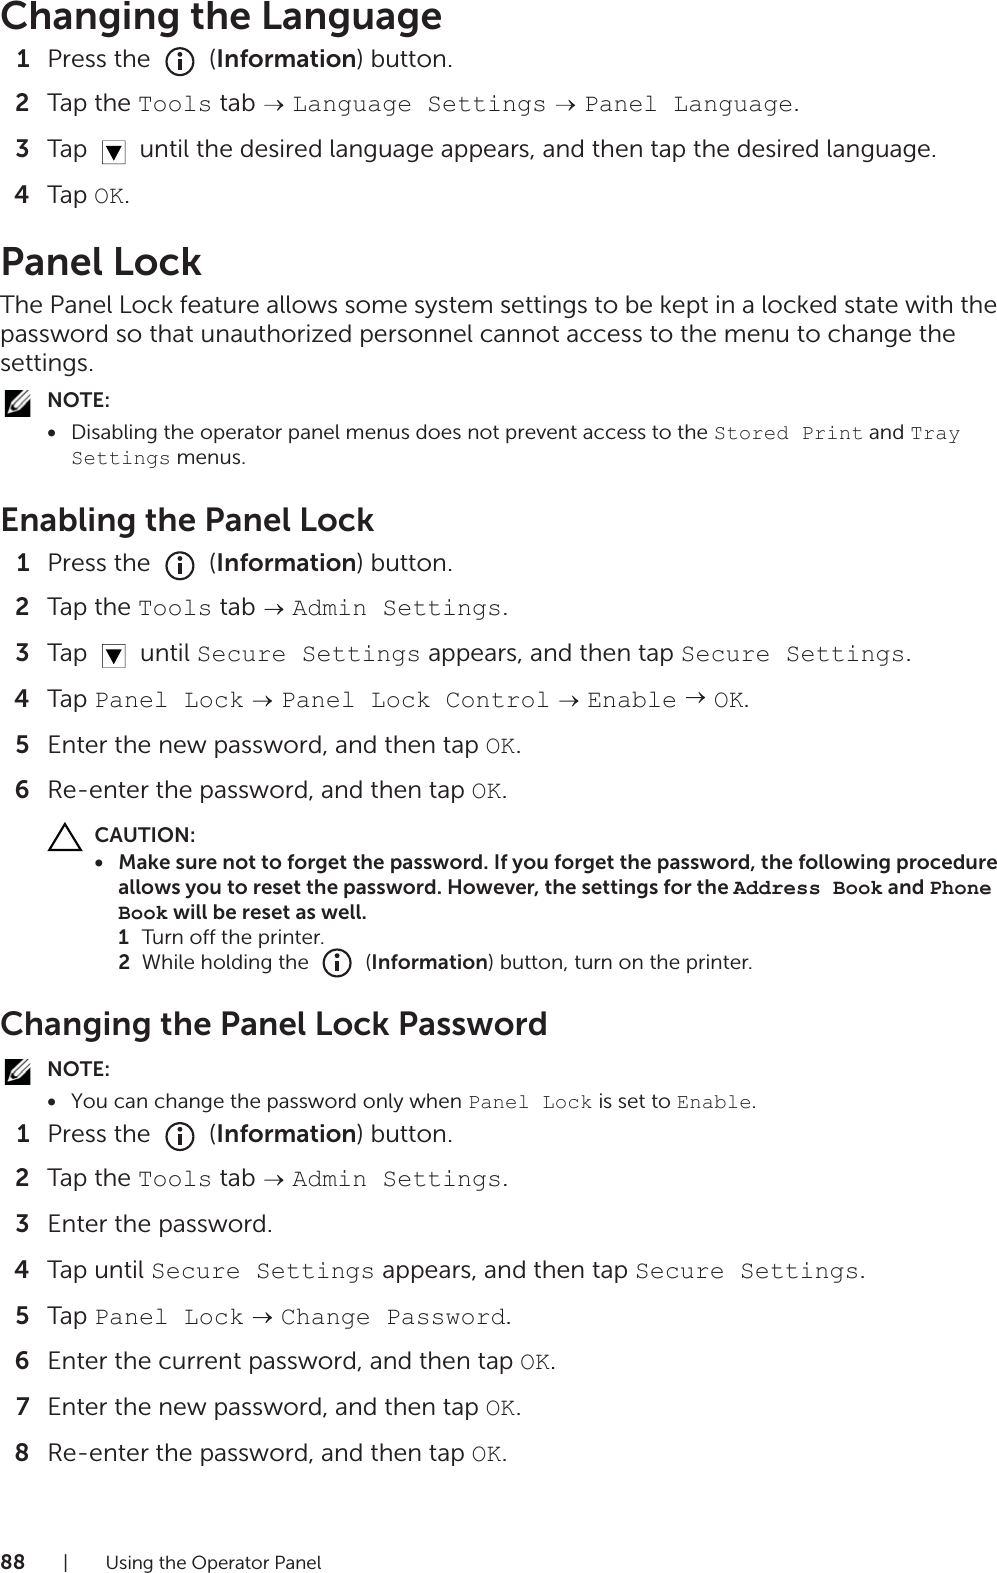 88| Using the Operator PanelChanging the Language1Press the   (Information) button.2Tap the Tools tab   Language Settings  Panel Language.3Tap   until the desired language appears, and then tap the desired language.4Tap OK.Panel LockThe Panel Lock feature allows some system settings to be kept in a locked state with the password so that unauthorized personnel cannot access to the menu to change the settings.NOTE:•Disabling the operator panel menus does not prevent access to the Stored Print and Tray Settings menus.Enabling the Panel Lock1Press the   (Information) button.2Tap the Tools tab   Admin Settings.3Tap  until Secure Settings appears, and then tap Secure Settings.4Tap Panel Lock  Panel Lock Control  Enable  OK.5Enter the new password, and then tap OK.6Re-enter the password, and then tap OK.CAUTION:• Make sure not to forget the password. If you forget the password, the following procedure allows you to reset the password. However, the settings for the Address Book and Phone Book will be reset as well.1Turn off the printer.2While holding the   (Information) button, turn on the printer.Changing the Panel Lock PasswordNOTE:•You can change the password only when Panel Lock is set to Enable.1Press the   (Information) button.2Tap the Tools tab   Admin Settings.3Enter the password.4Tap until Secure Settings appears, and then tap Secure Settings.5Tap Panel Lock  Change Password.6Enter the current password, and then tap OK.7Enter the new password, and then tap OK.8Re-enter the password, and then tap OK.